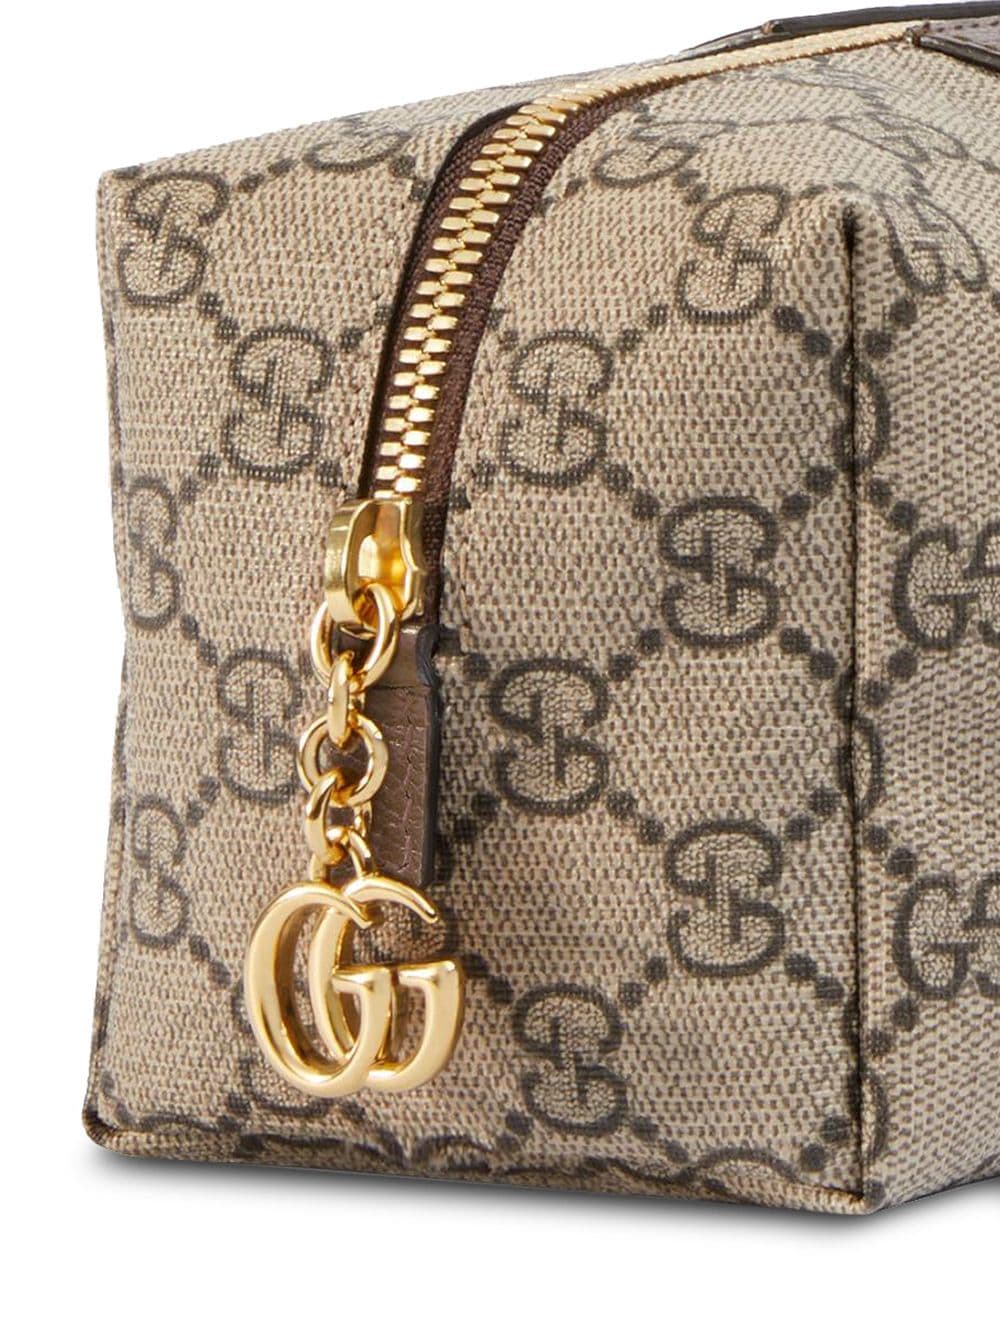 Gucci GG Supreme Ophidia Cosmetic Pouch - Brown Cosmetic Bags, Accessories  - GUC1333750